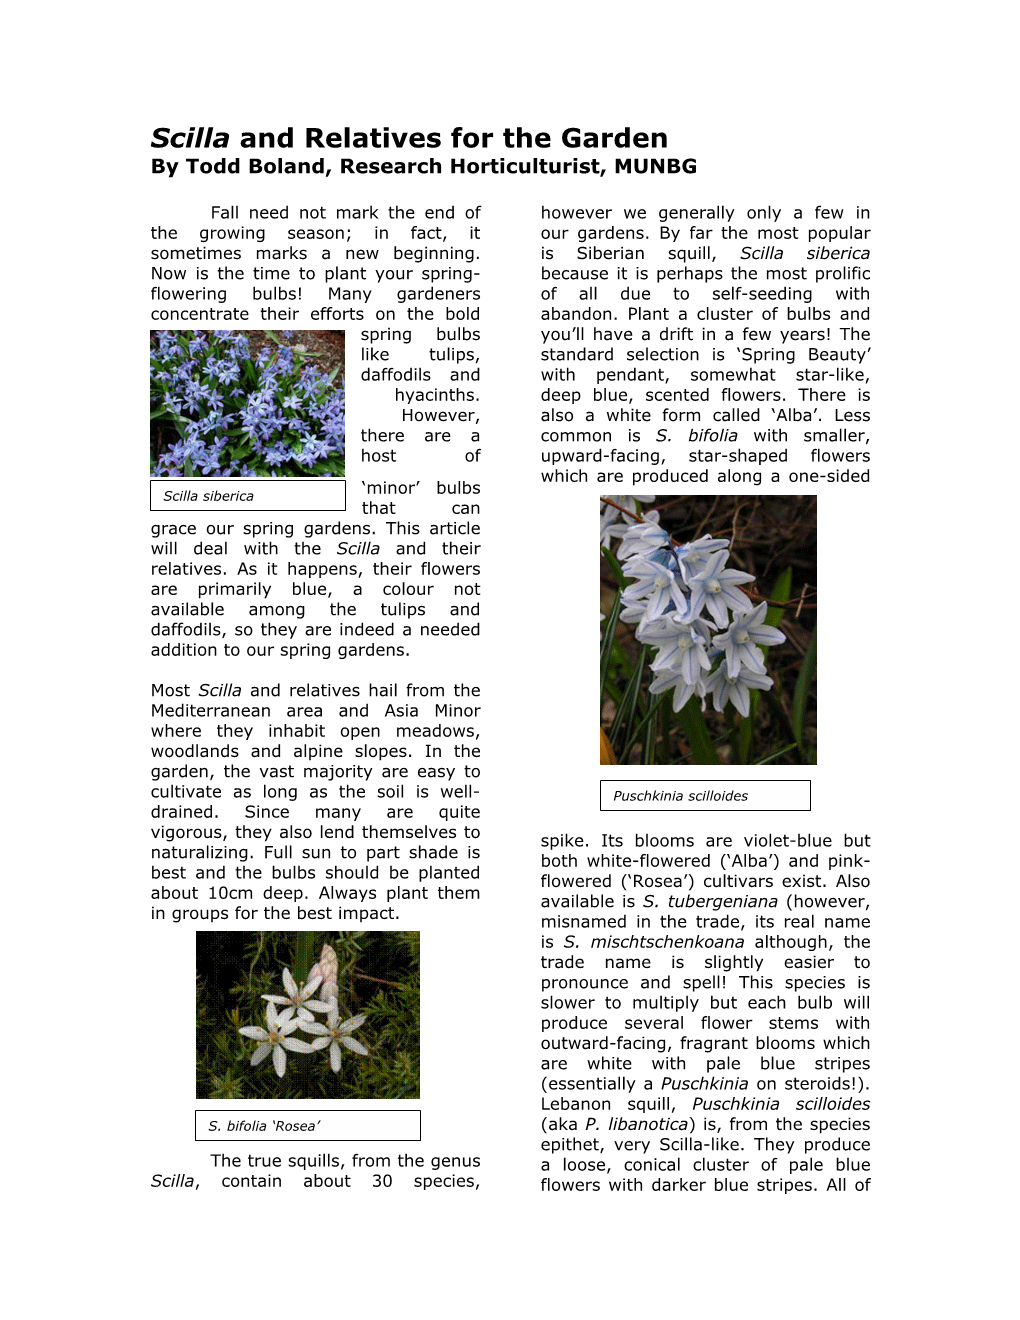 Scilla and Relatives for the Garden by Todd Boland, Research Horticulturist, MUNBG